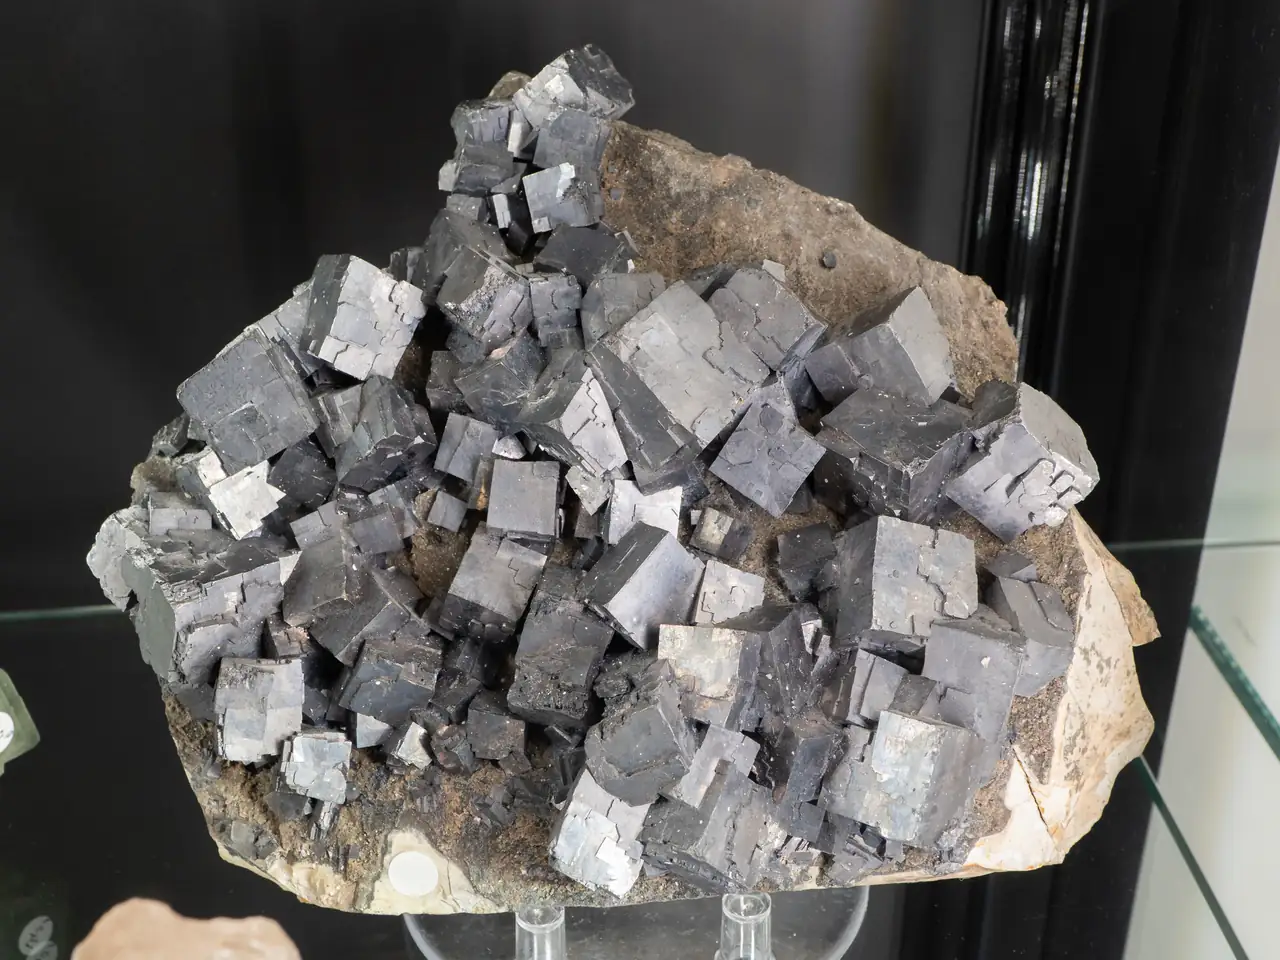 Cluster of cubic galena crystals from Joplin, Missouri, USA.